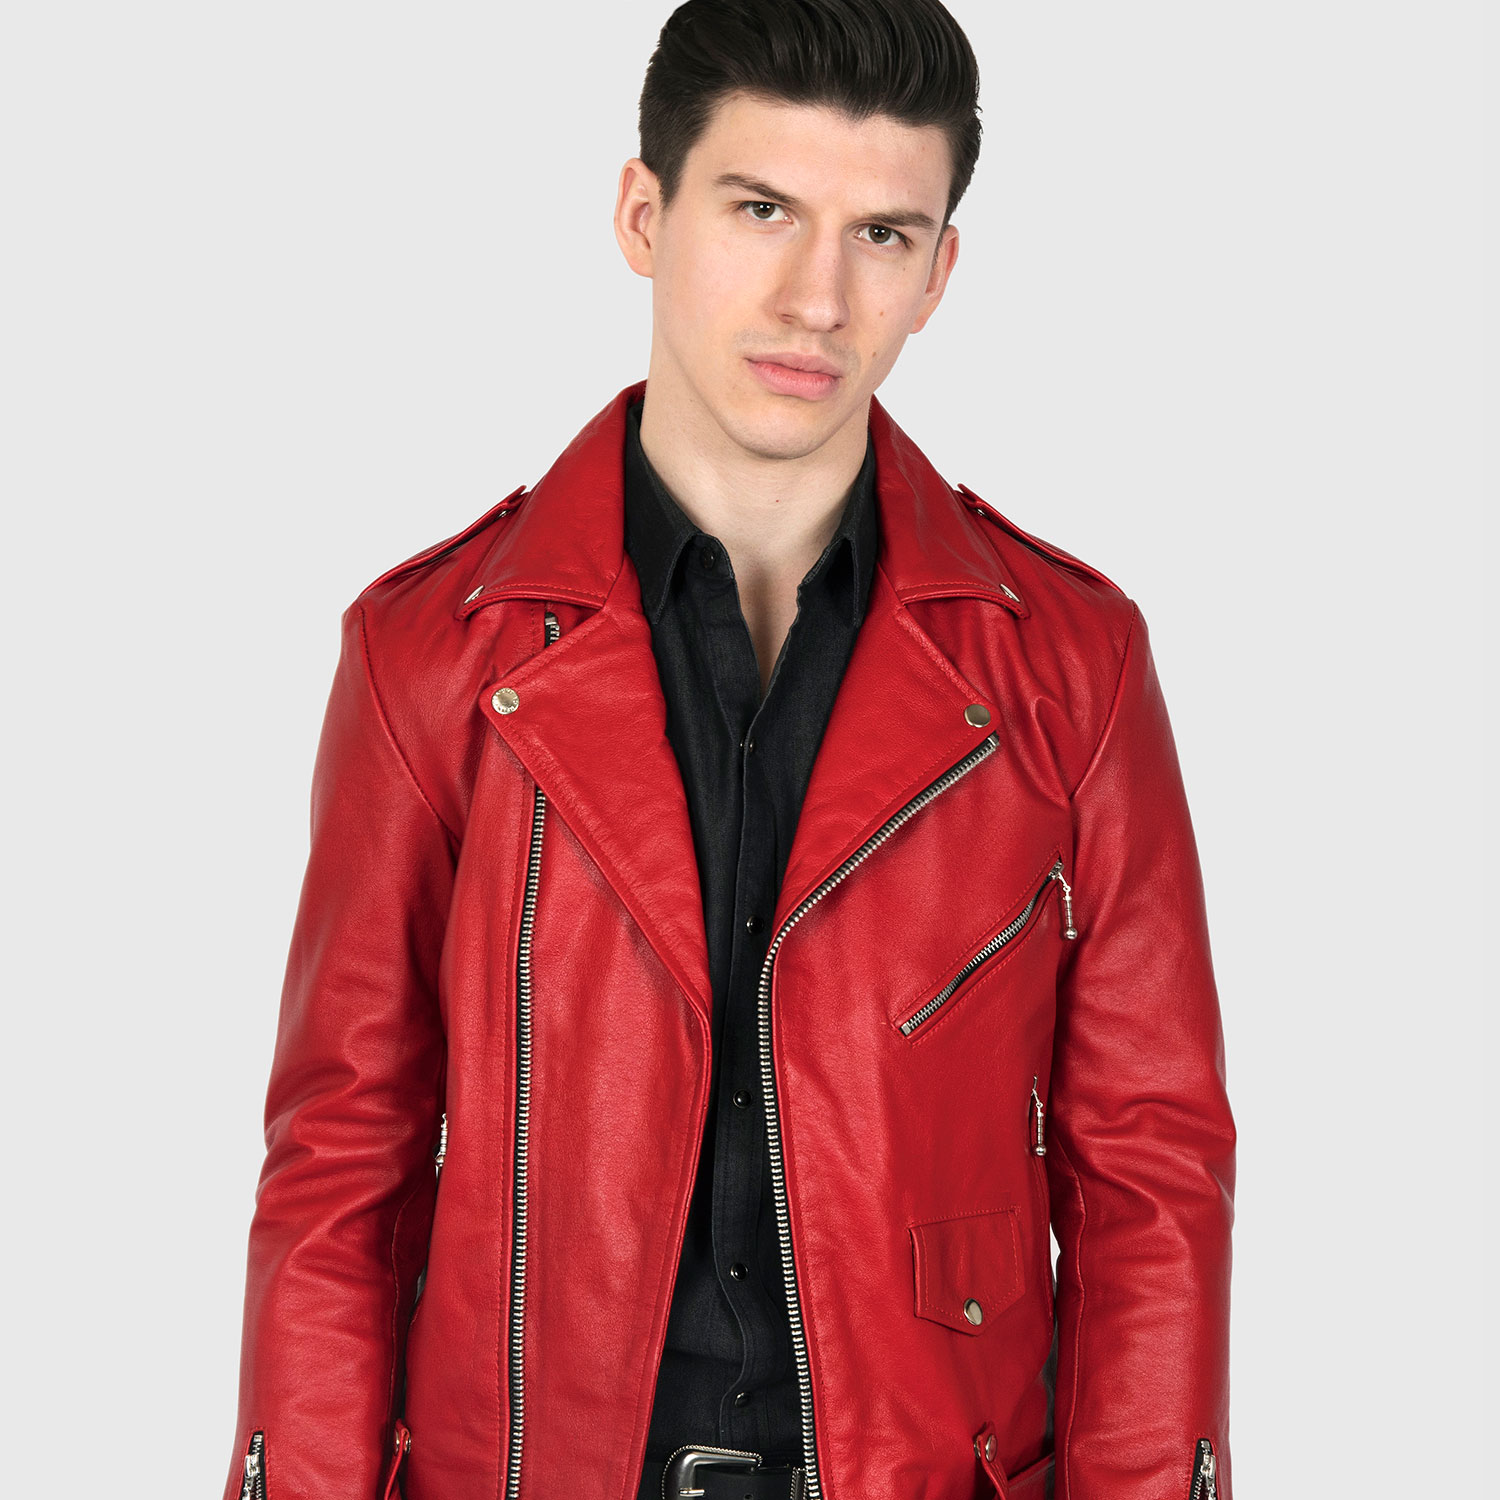 Commando - Blood Red Leather Jacket - Men's by Straight to Hell